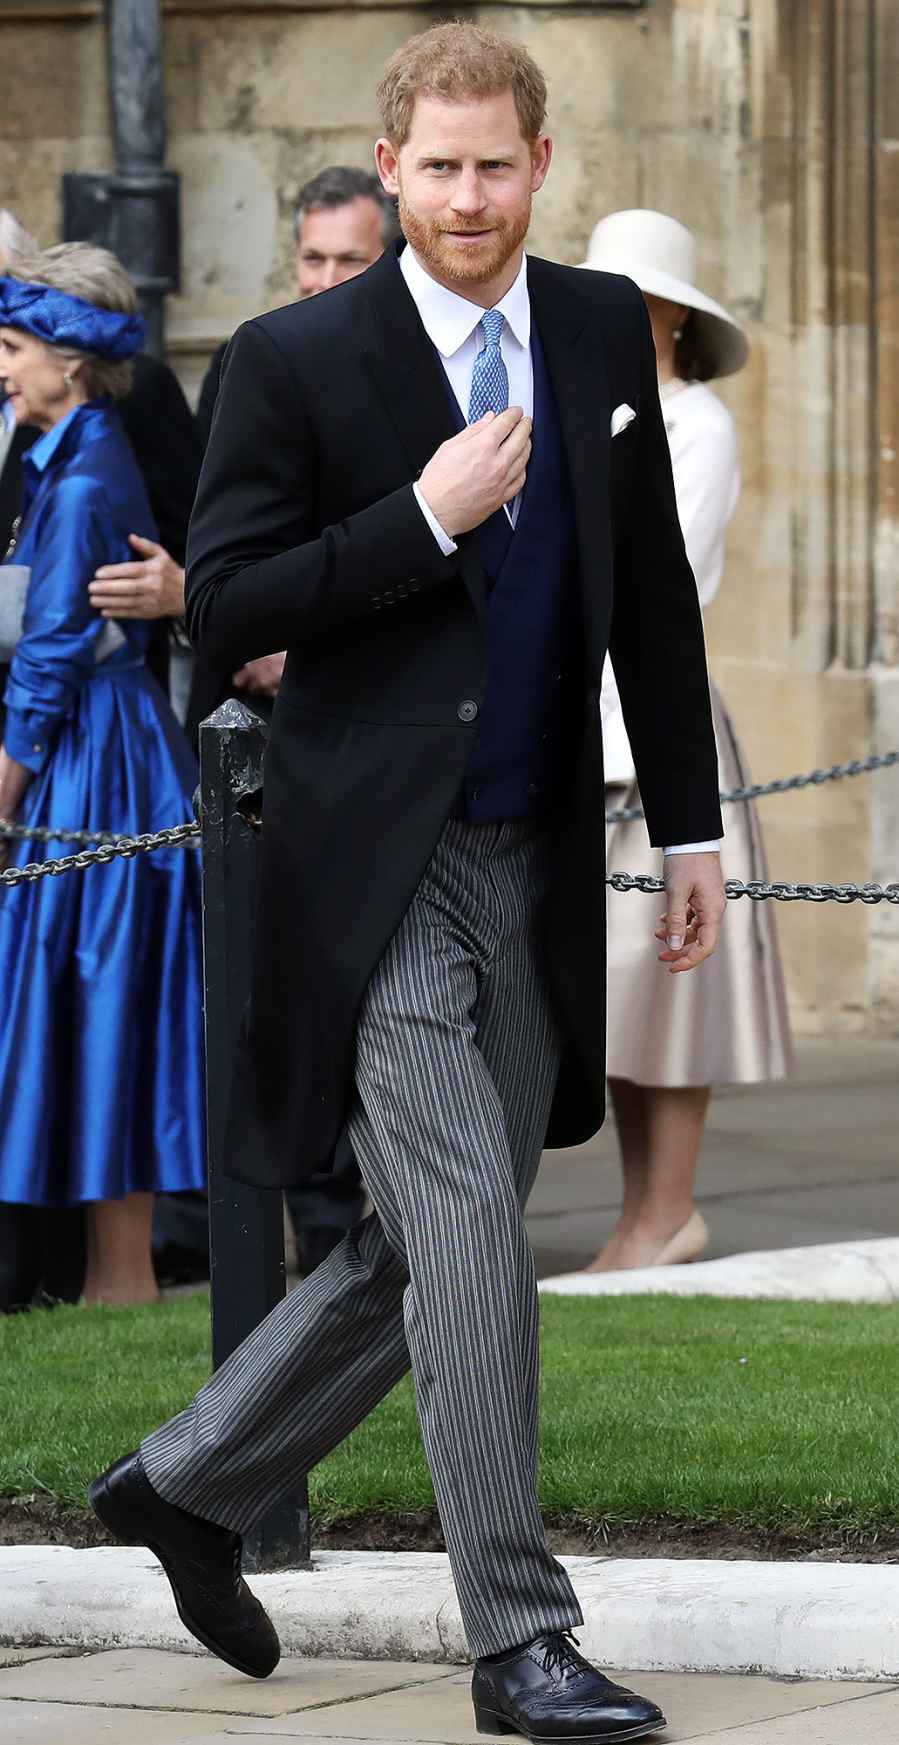 9 2019 Prince Harry Is the Sexiest Royal in Honor of His Birthday